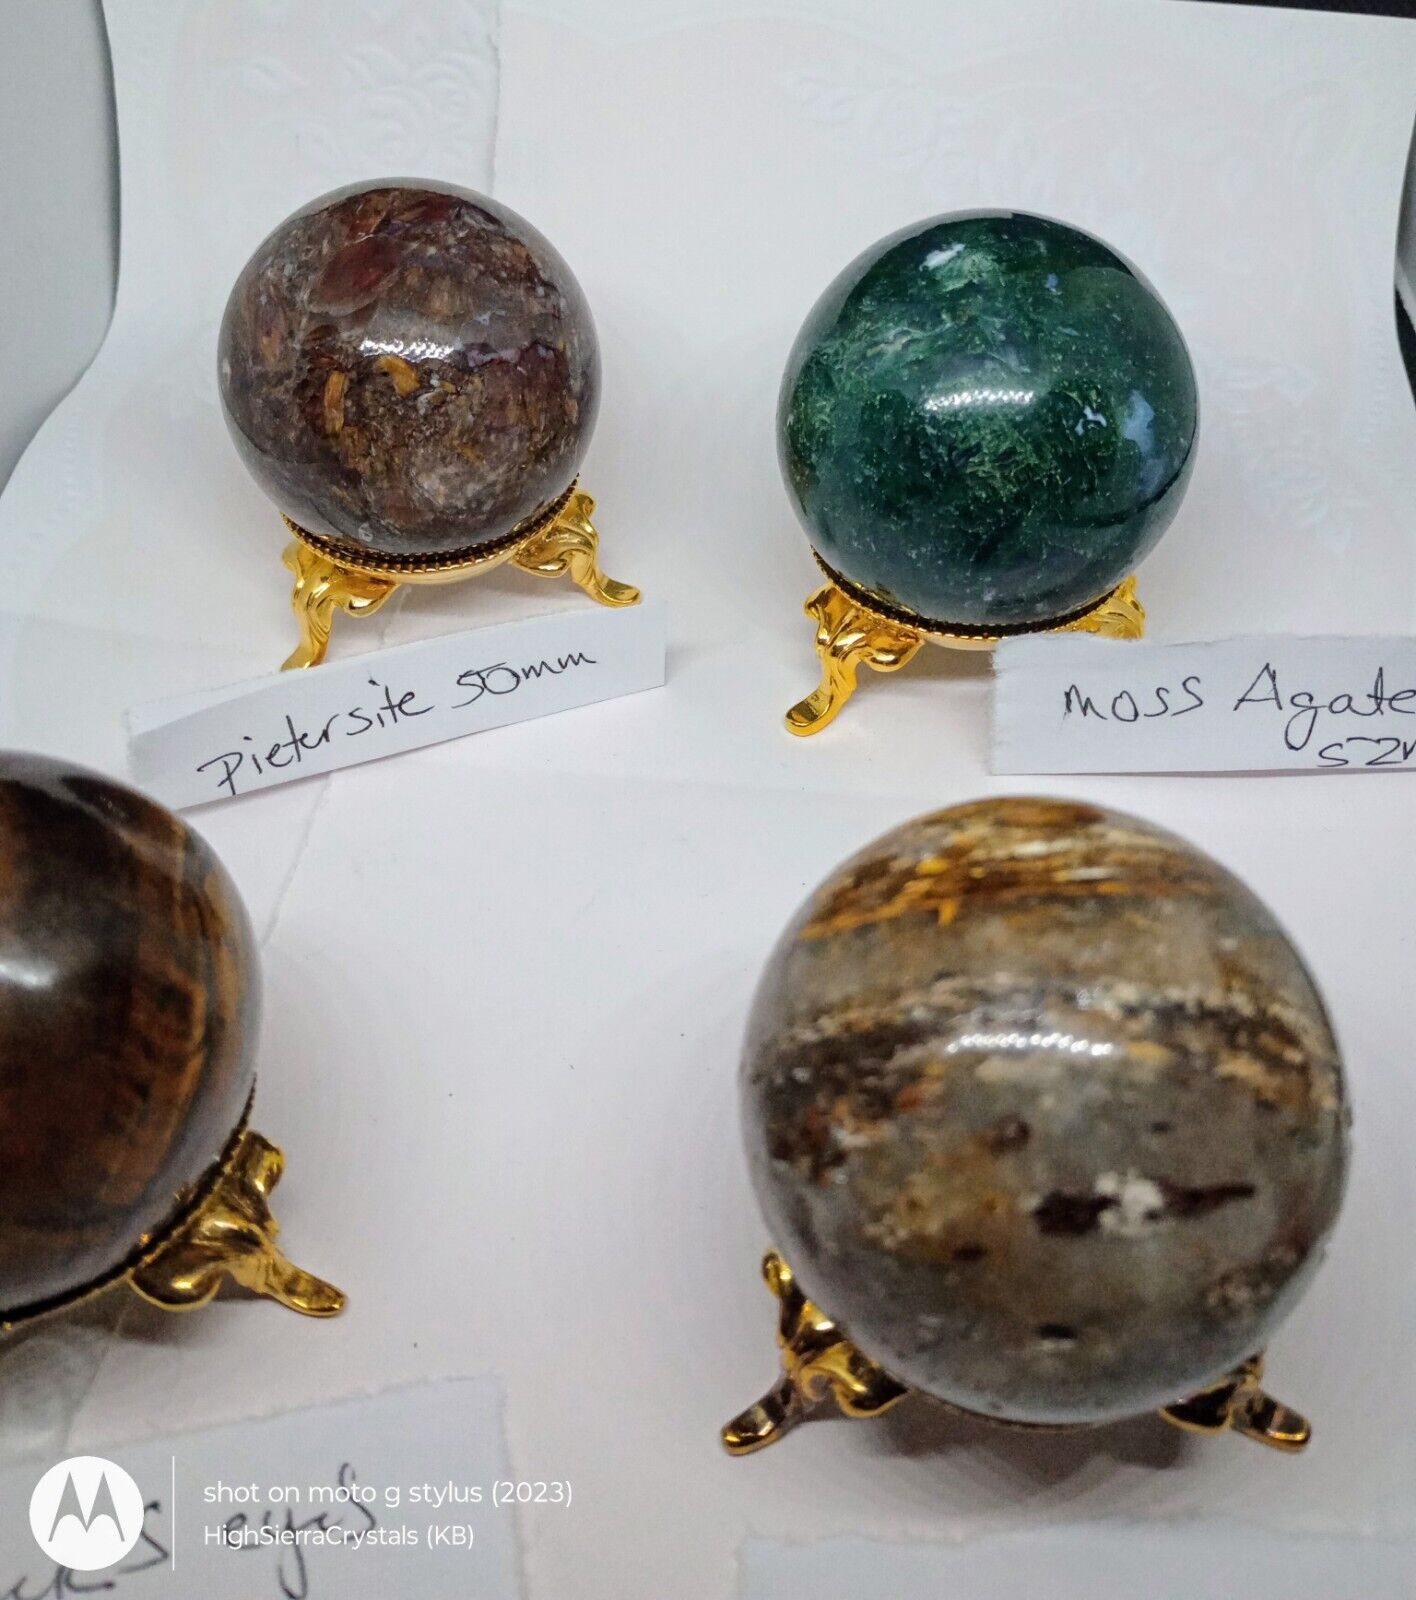 🔥 4 PC Lot Spheres W Stands Pietersite Moss Agate Mosaic Agate Tigers Eye 